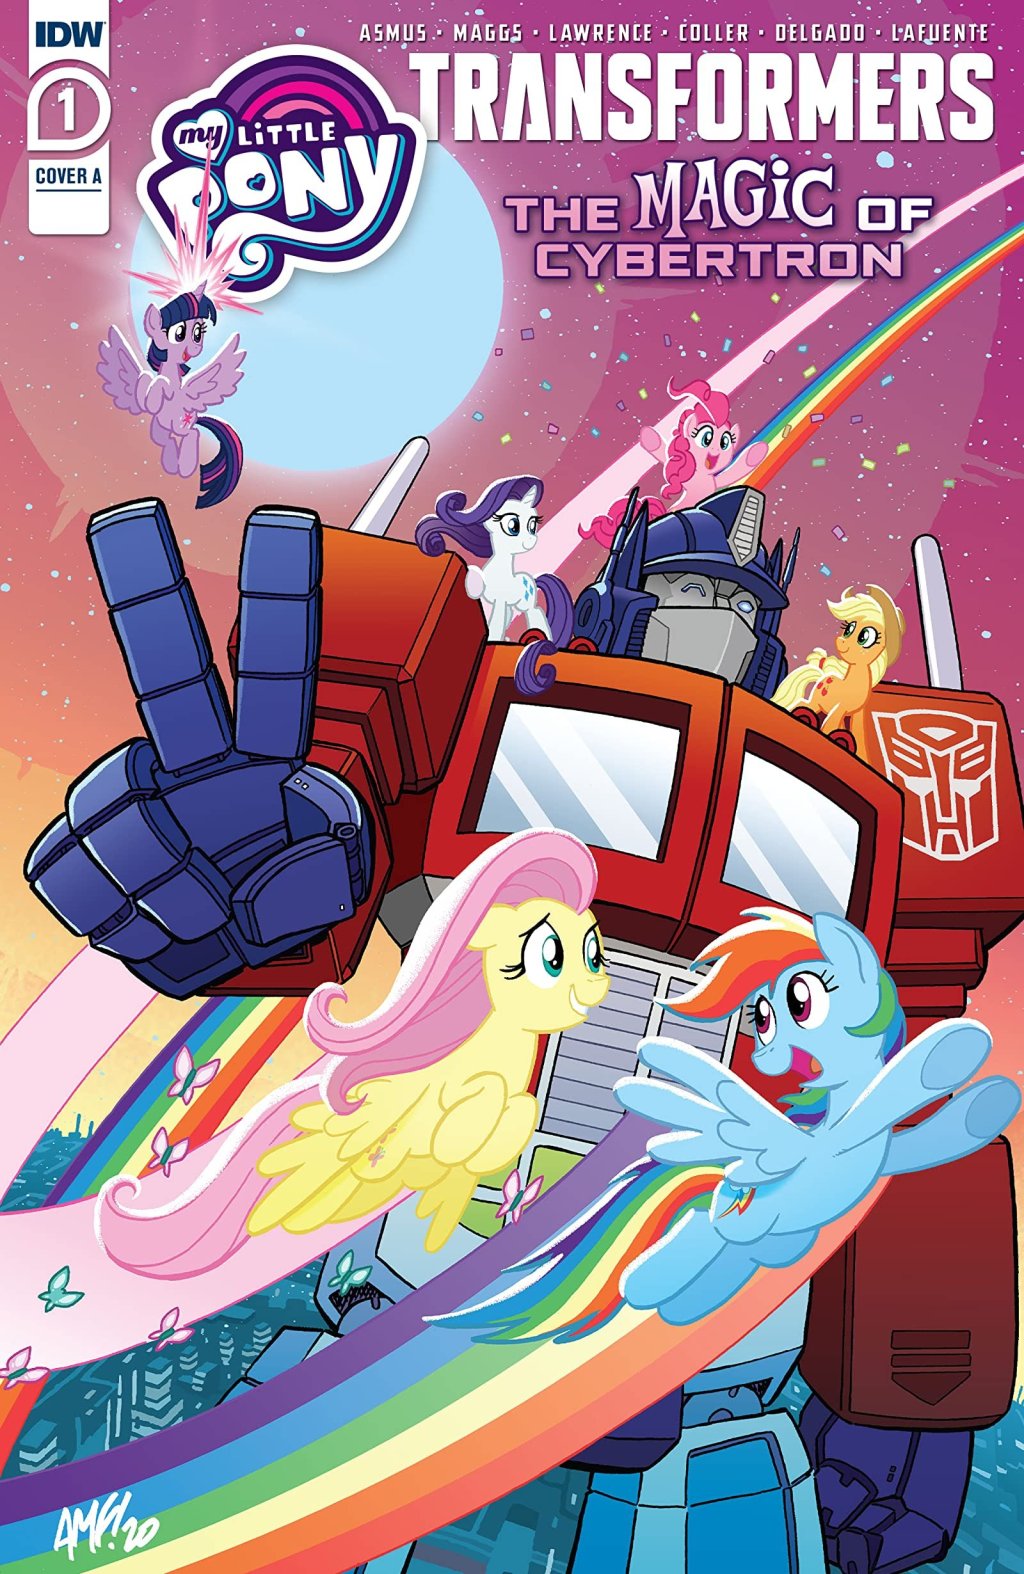 Comic Book Review: My Little Pony/Transformers II #1